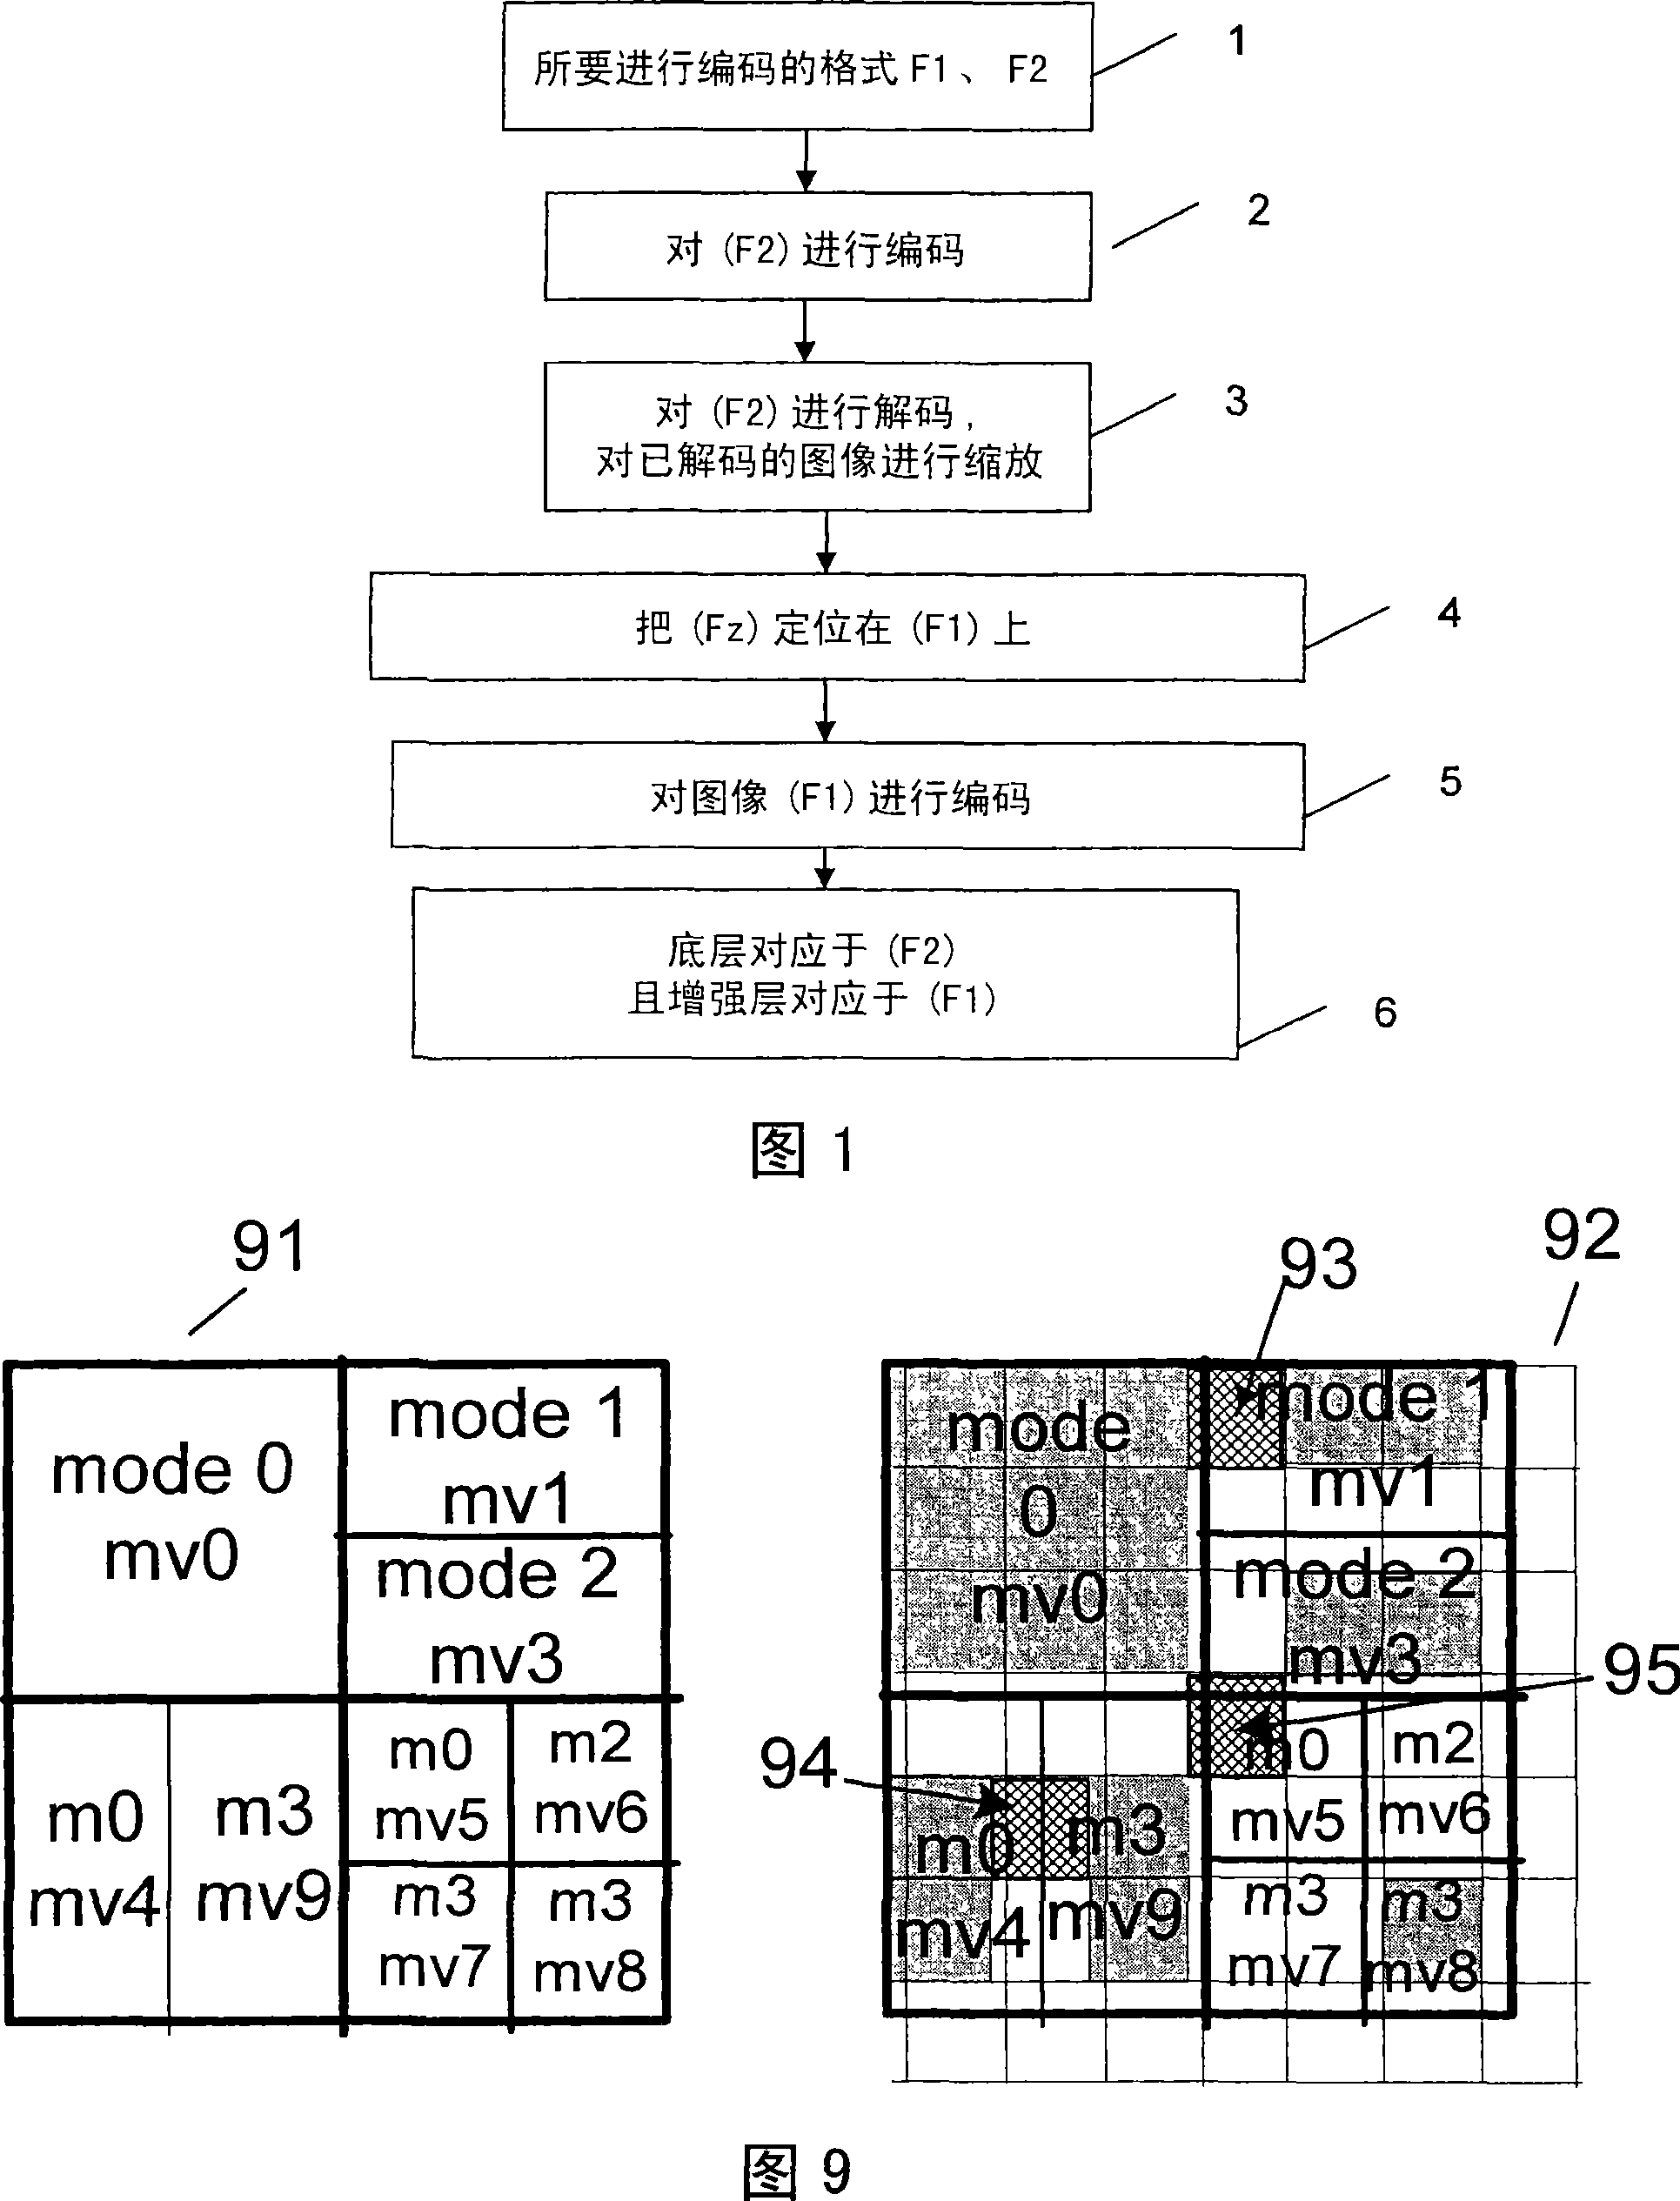 Method for scalable video coding